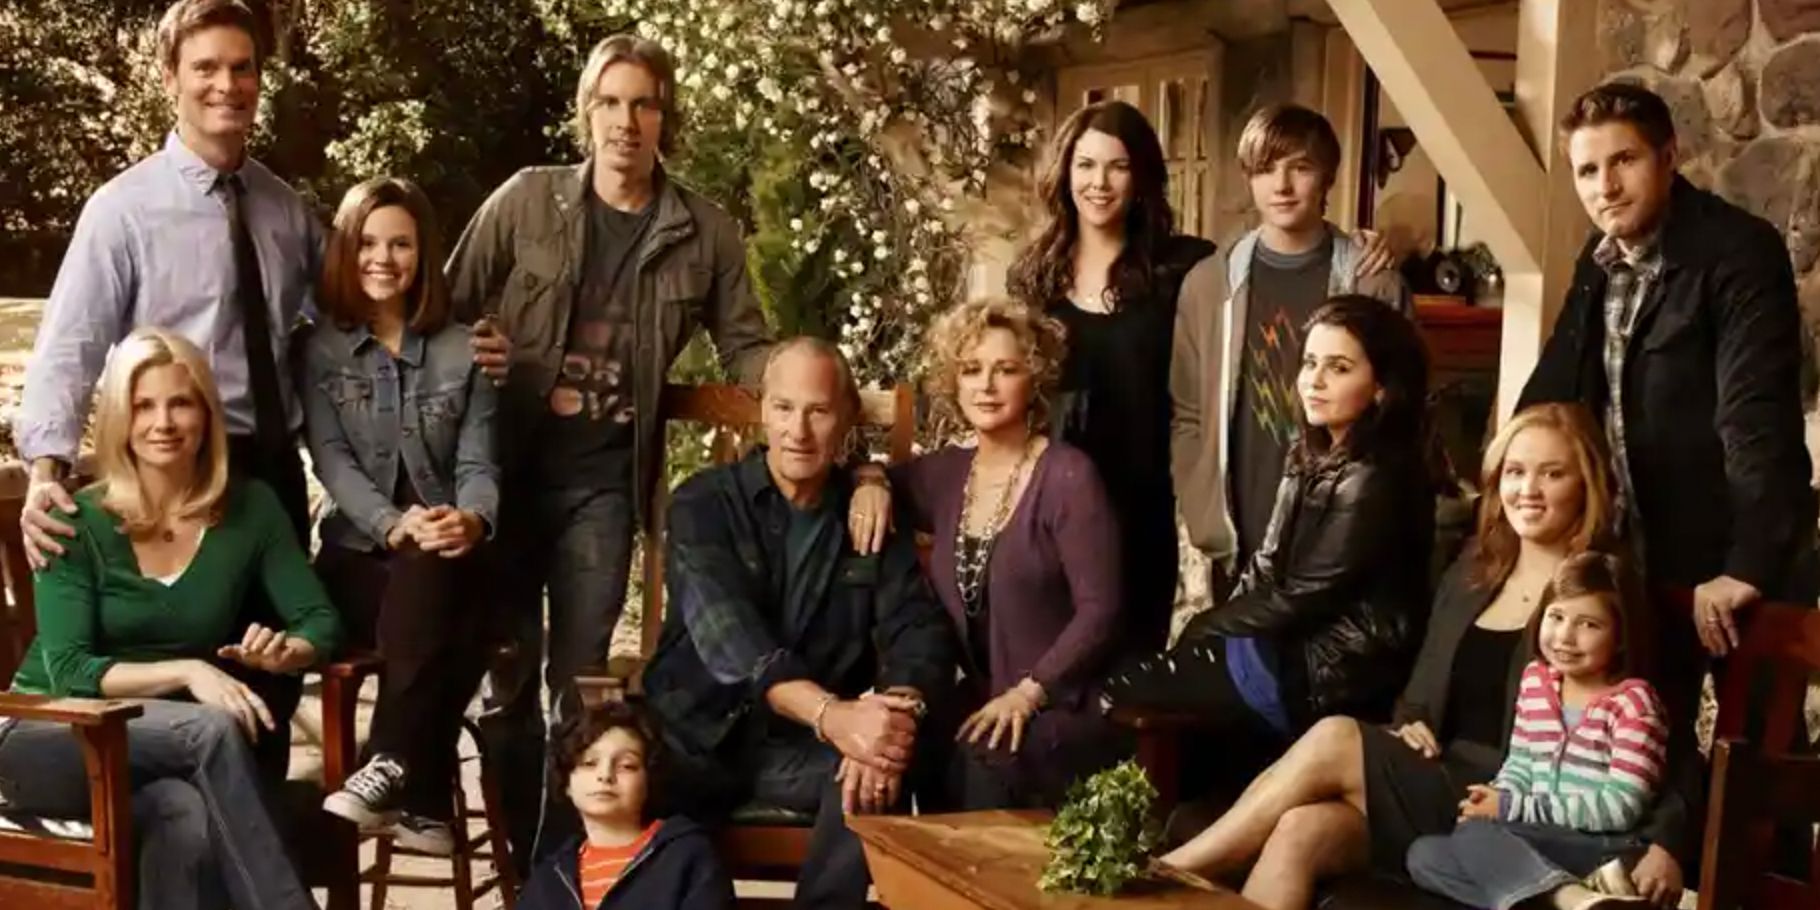 The Braverman family gathers in the backyard in Parenthood